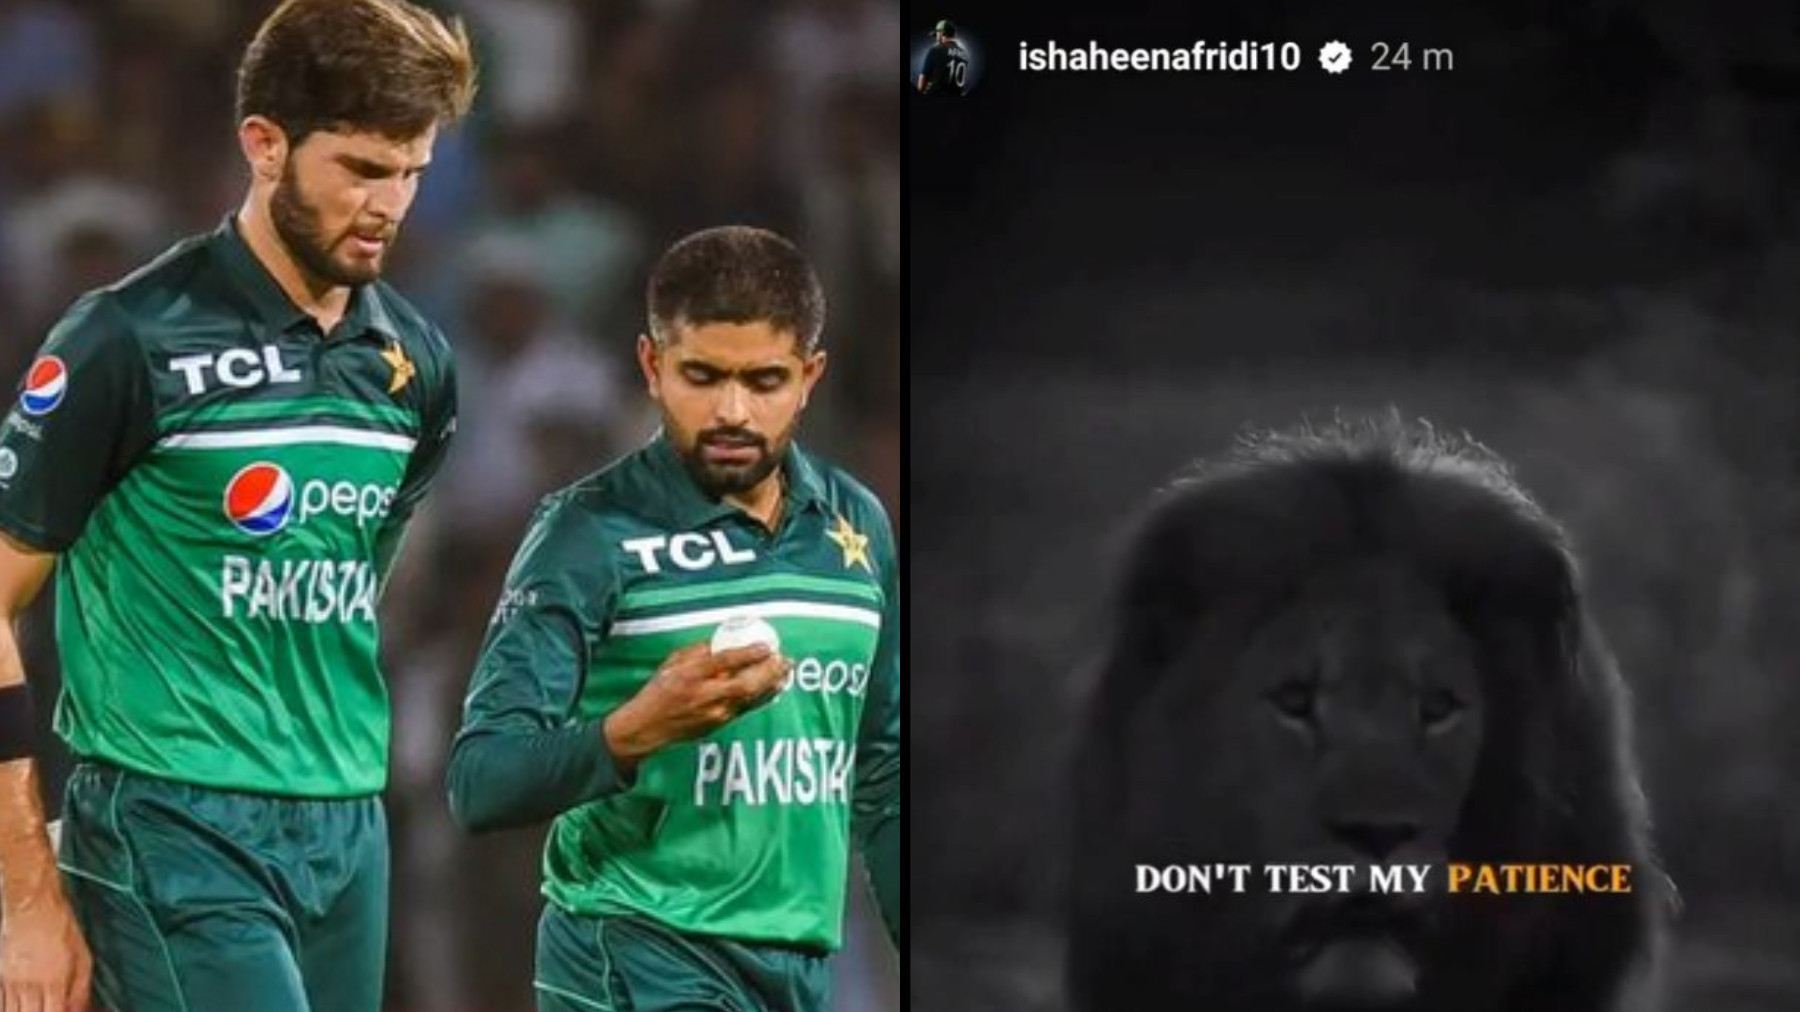 'Don't test my patience...'- Shaheen Afridi’s Instagram story after losing Pakistan white-ball captaincy to Babar Azam